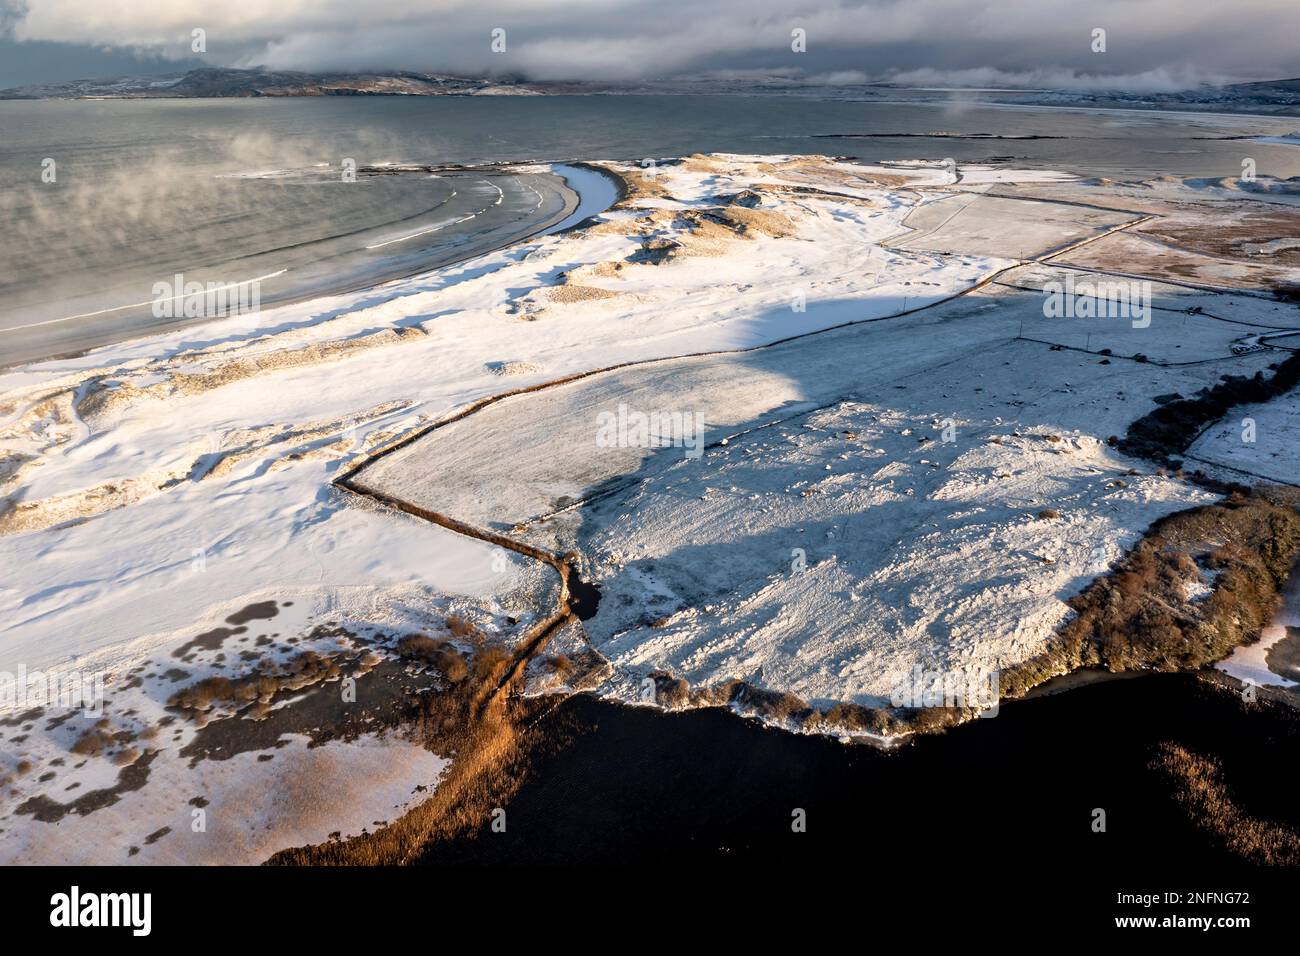 Aerial view of the snow covered Narin Portnoo Golf links in County Donegal, Ireland. Stock Photo